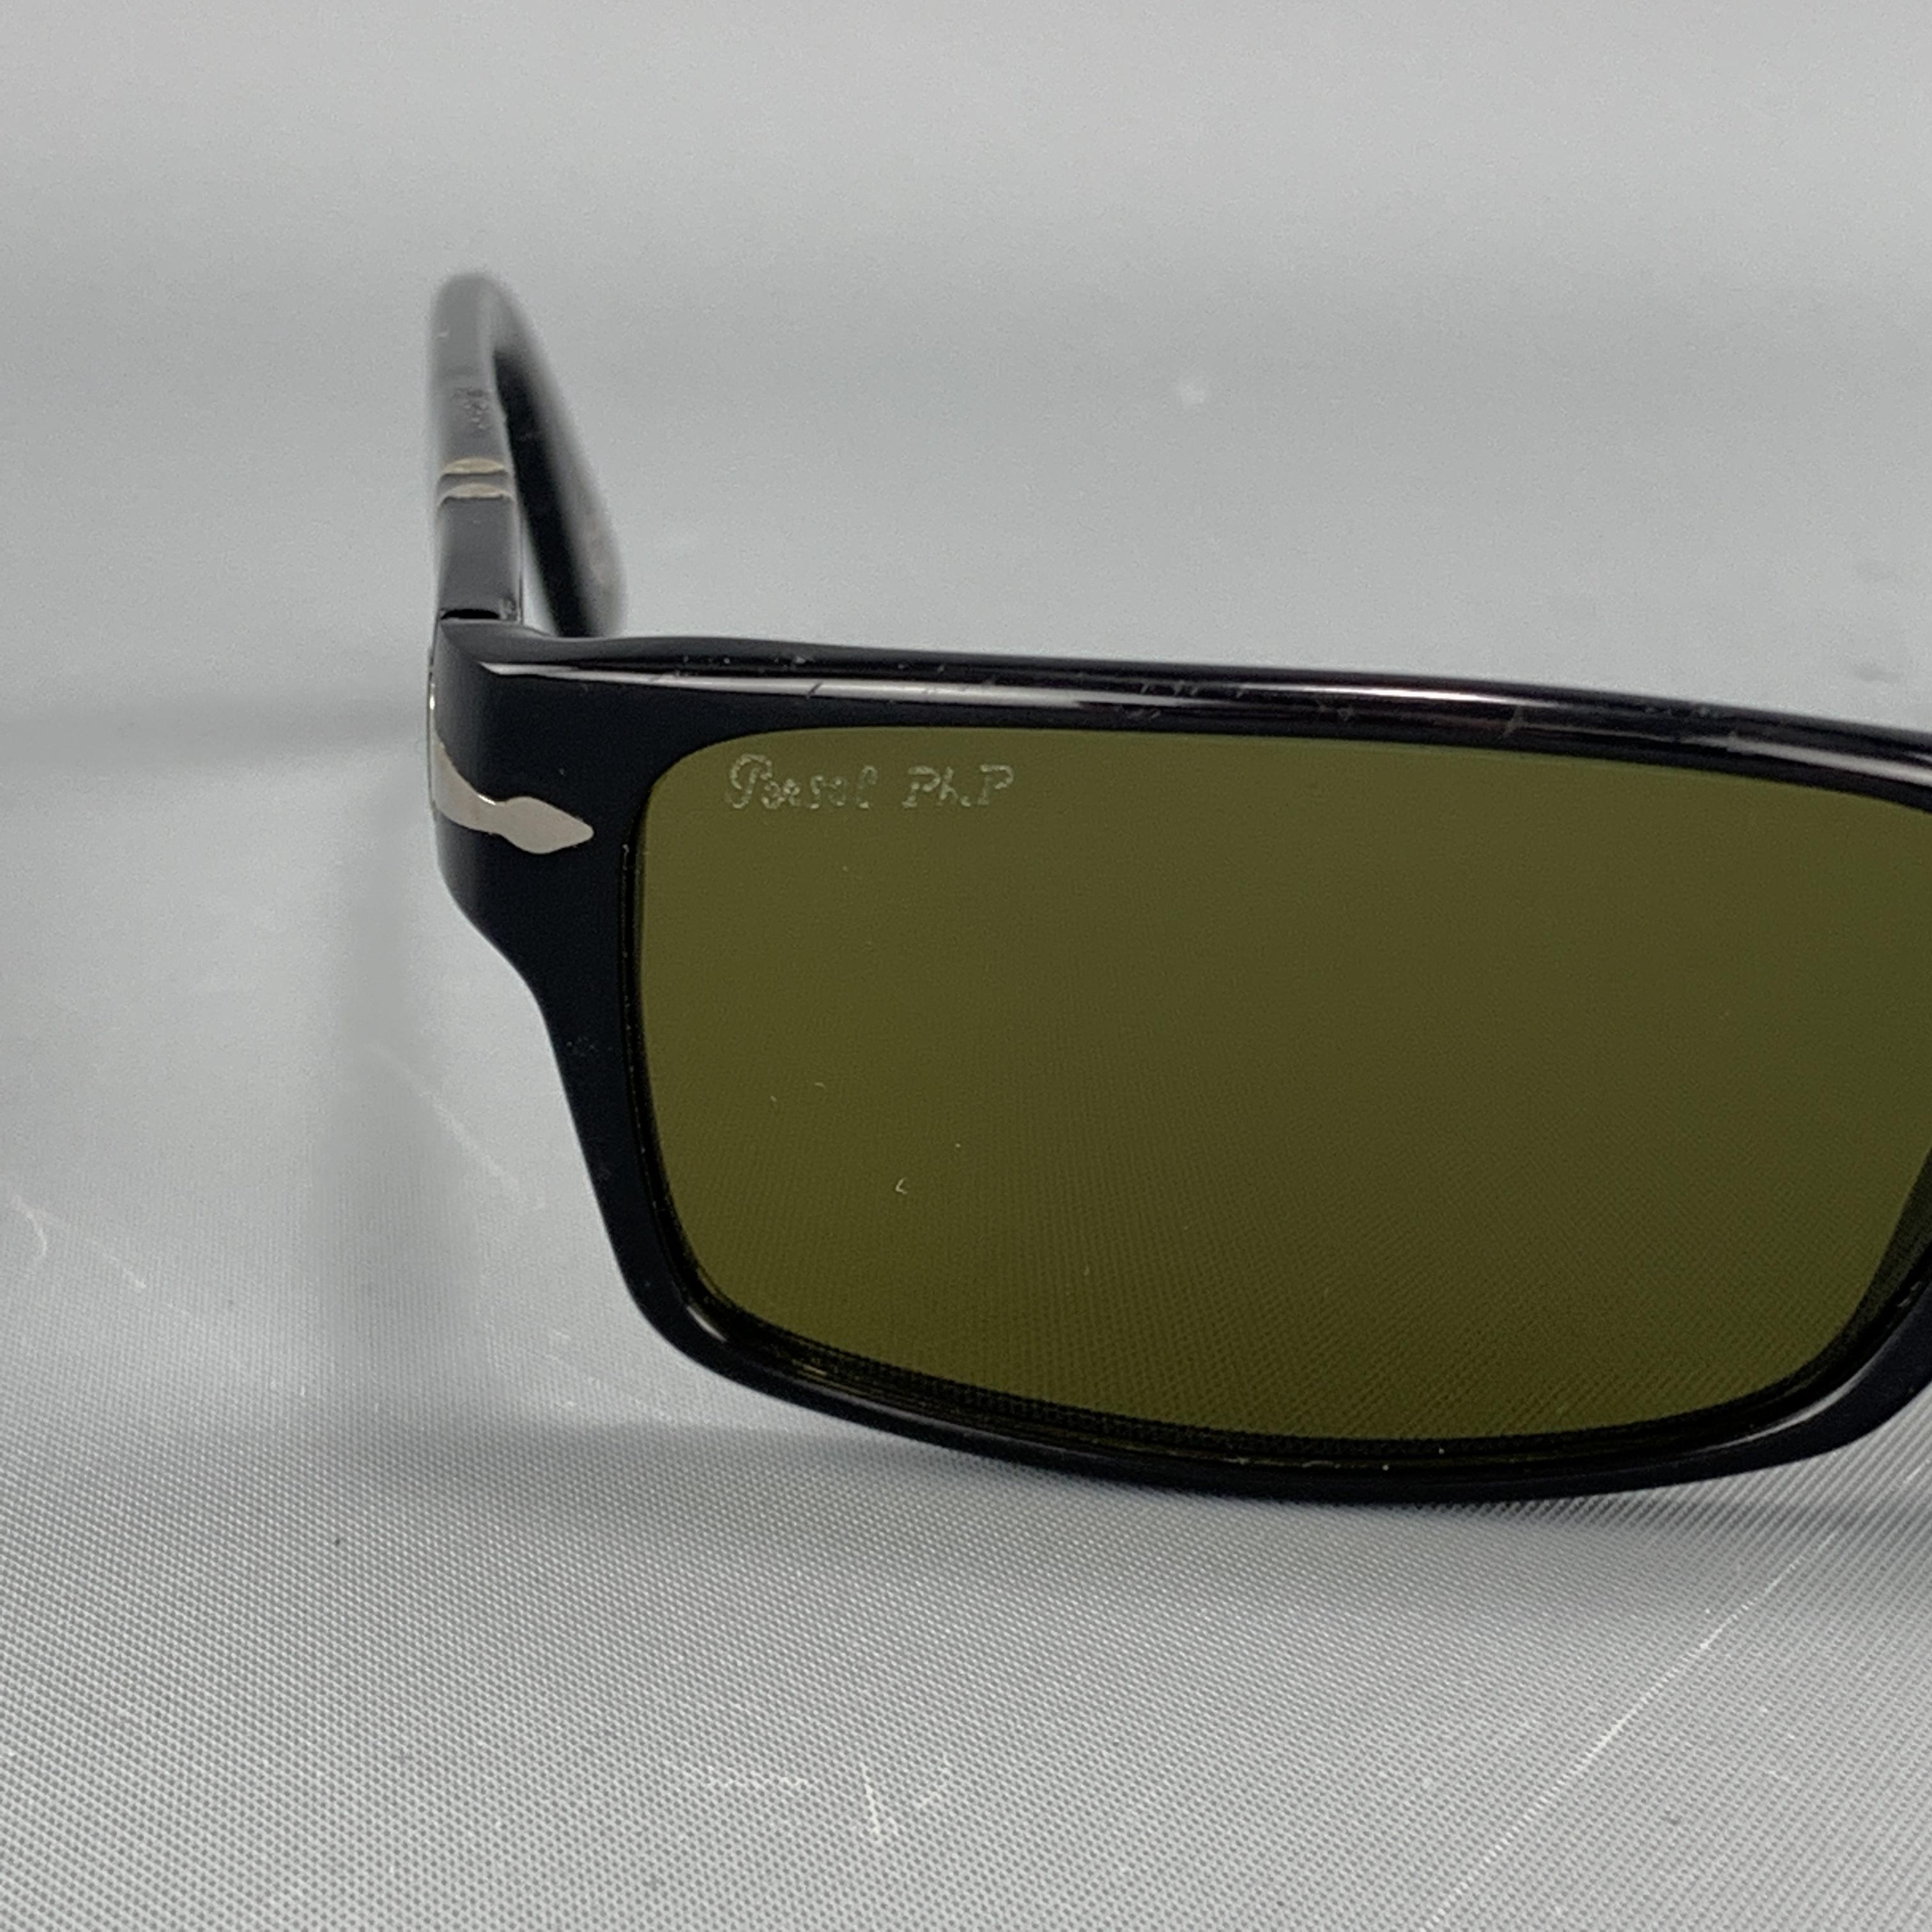 PERSOL sunglasses come in black acetate with silver tone accents and green rectangular lenses. Made in Italy.

Good Pre-Owned Condition.
Marked: 2747-S 95/24 57 16 140 3F

Measurements:

Length:14 cm.
Height: 3.75 cm.